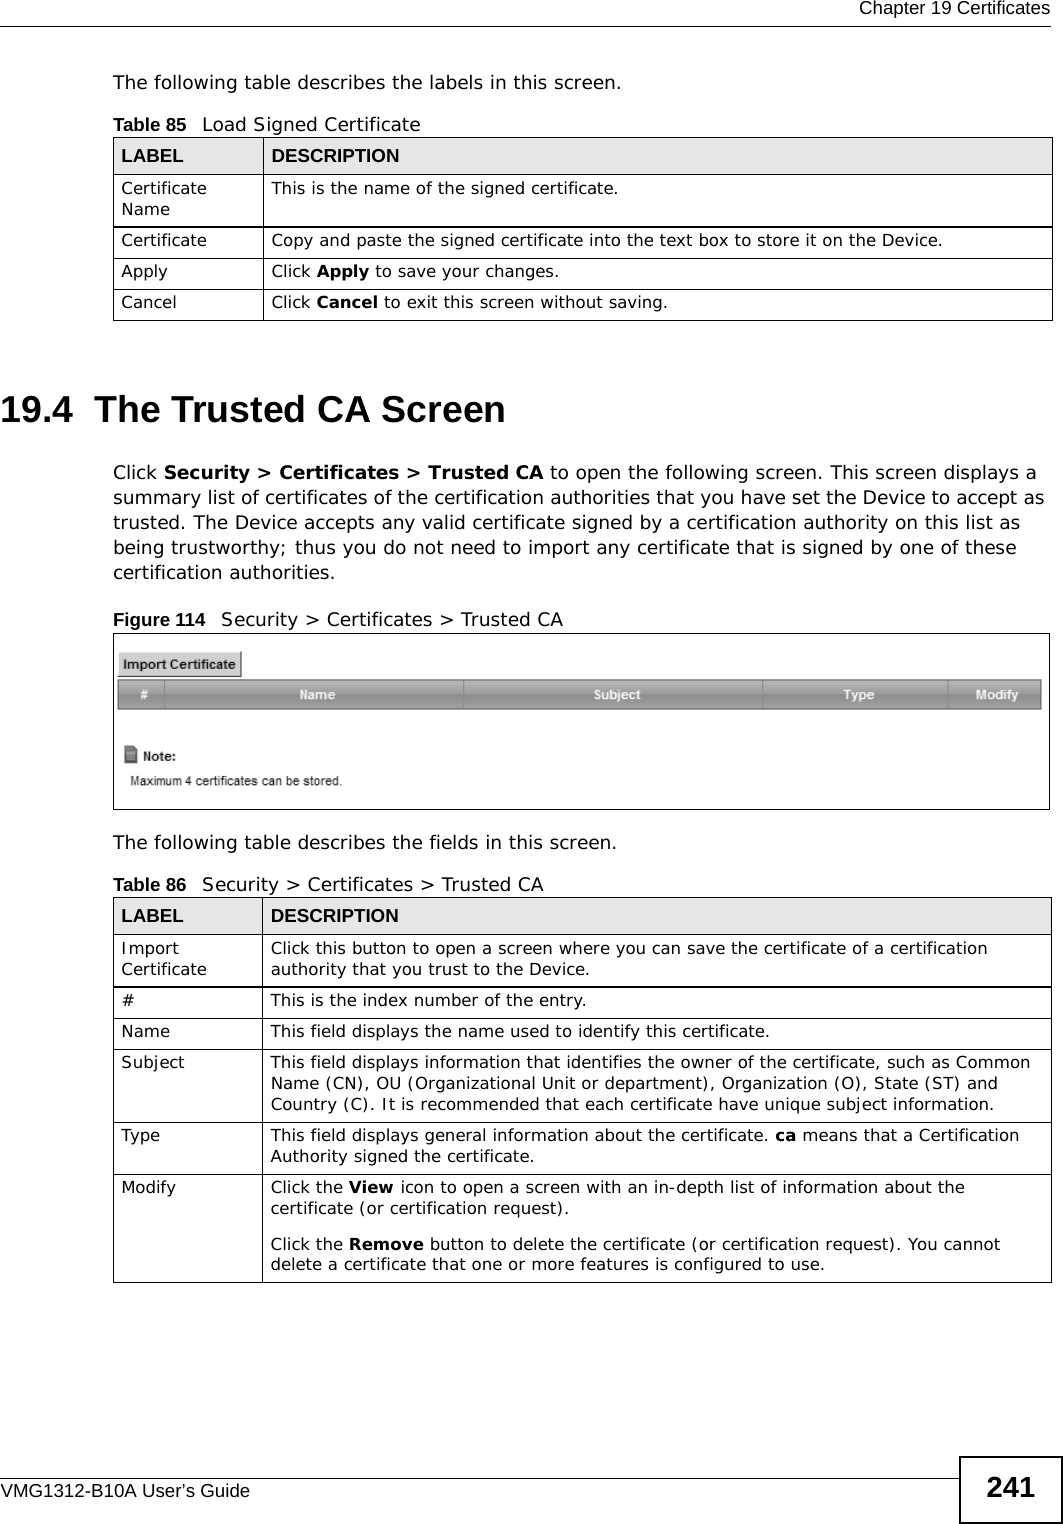  Chapter 19 CertificatesVMG1312-B10A User’s Guide 241The following table describes the labels in this screen. 19.4  The Trusted CA ScreenClick Security &gt; Certificates &gt; Trusted CA to open the following screen. This screen displays a summary list of certificates of the certification authorities that you have set the Device to accept as trusted. The Device accepts any valid certificate signed by a certification authority on this list as being trustworthy; thus you do not need to import any certificate that is signed by one of these certification authorities. Figure 114   Security &gt; Certificates &gt; Trusted CA The following table describes the fields in this screen. Table 85   Load Signed CertificateLABEL DESCRIPTIONCertificate Name This is the name of the signed certificate. Certificate Copy and paste the signed certificate into the text box to store it on the Device.Apply Click Apply to save your changes.Cancel Click Cancel to exit this screen without saving.Table 86   Security &gt; Certificates &gt; Trusted CALABEL DESCRIPTIONImport Certificate Click this button to open a screen where you can save the certificate of a certification authority that you trust to the Device.# This is the index number of the entry.Name This field displays the name used to identify this certificate. Subject This field displays information that identifies the owner of the certificate, such as Common Name (CN), OU (Organizational Unit or department), Organization (O), State (ST) and Country (C). It is recommended that each certificate have unique subject information.Type This field displays general information about the certificate. ca means that a Certification Authority signed the certificate. Modify Click the View icon to open a screen with an in-depth list of information about the certificate (or certification request).Click the Remove button to delete the certificate (or certification request). You cannot delete a certificate that one or more features is configured to use.